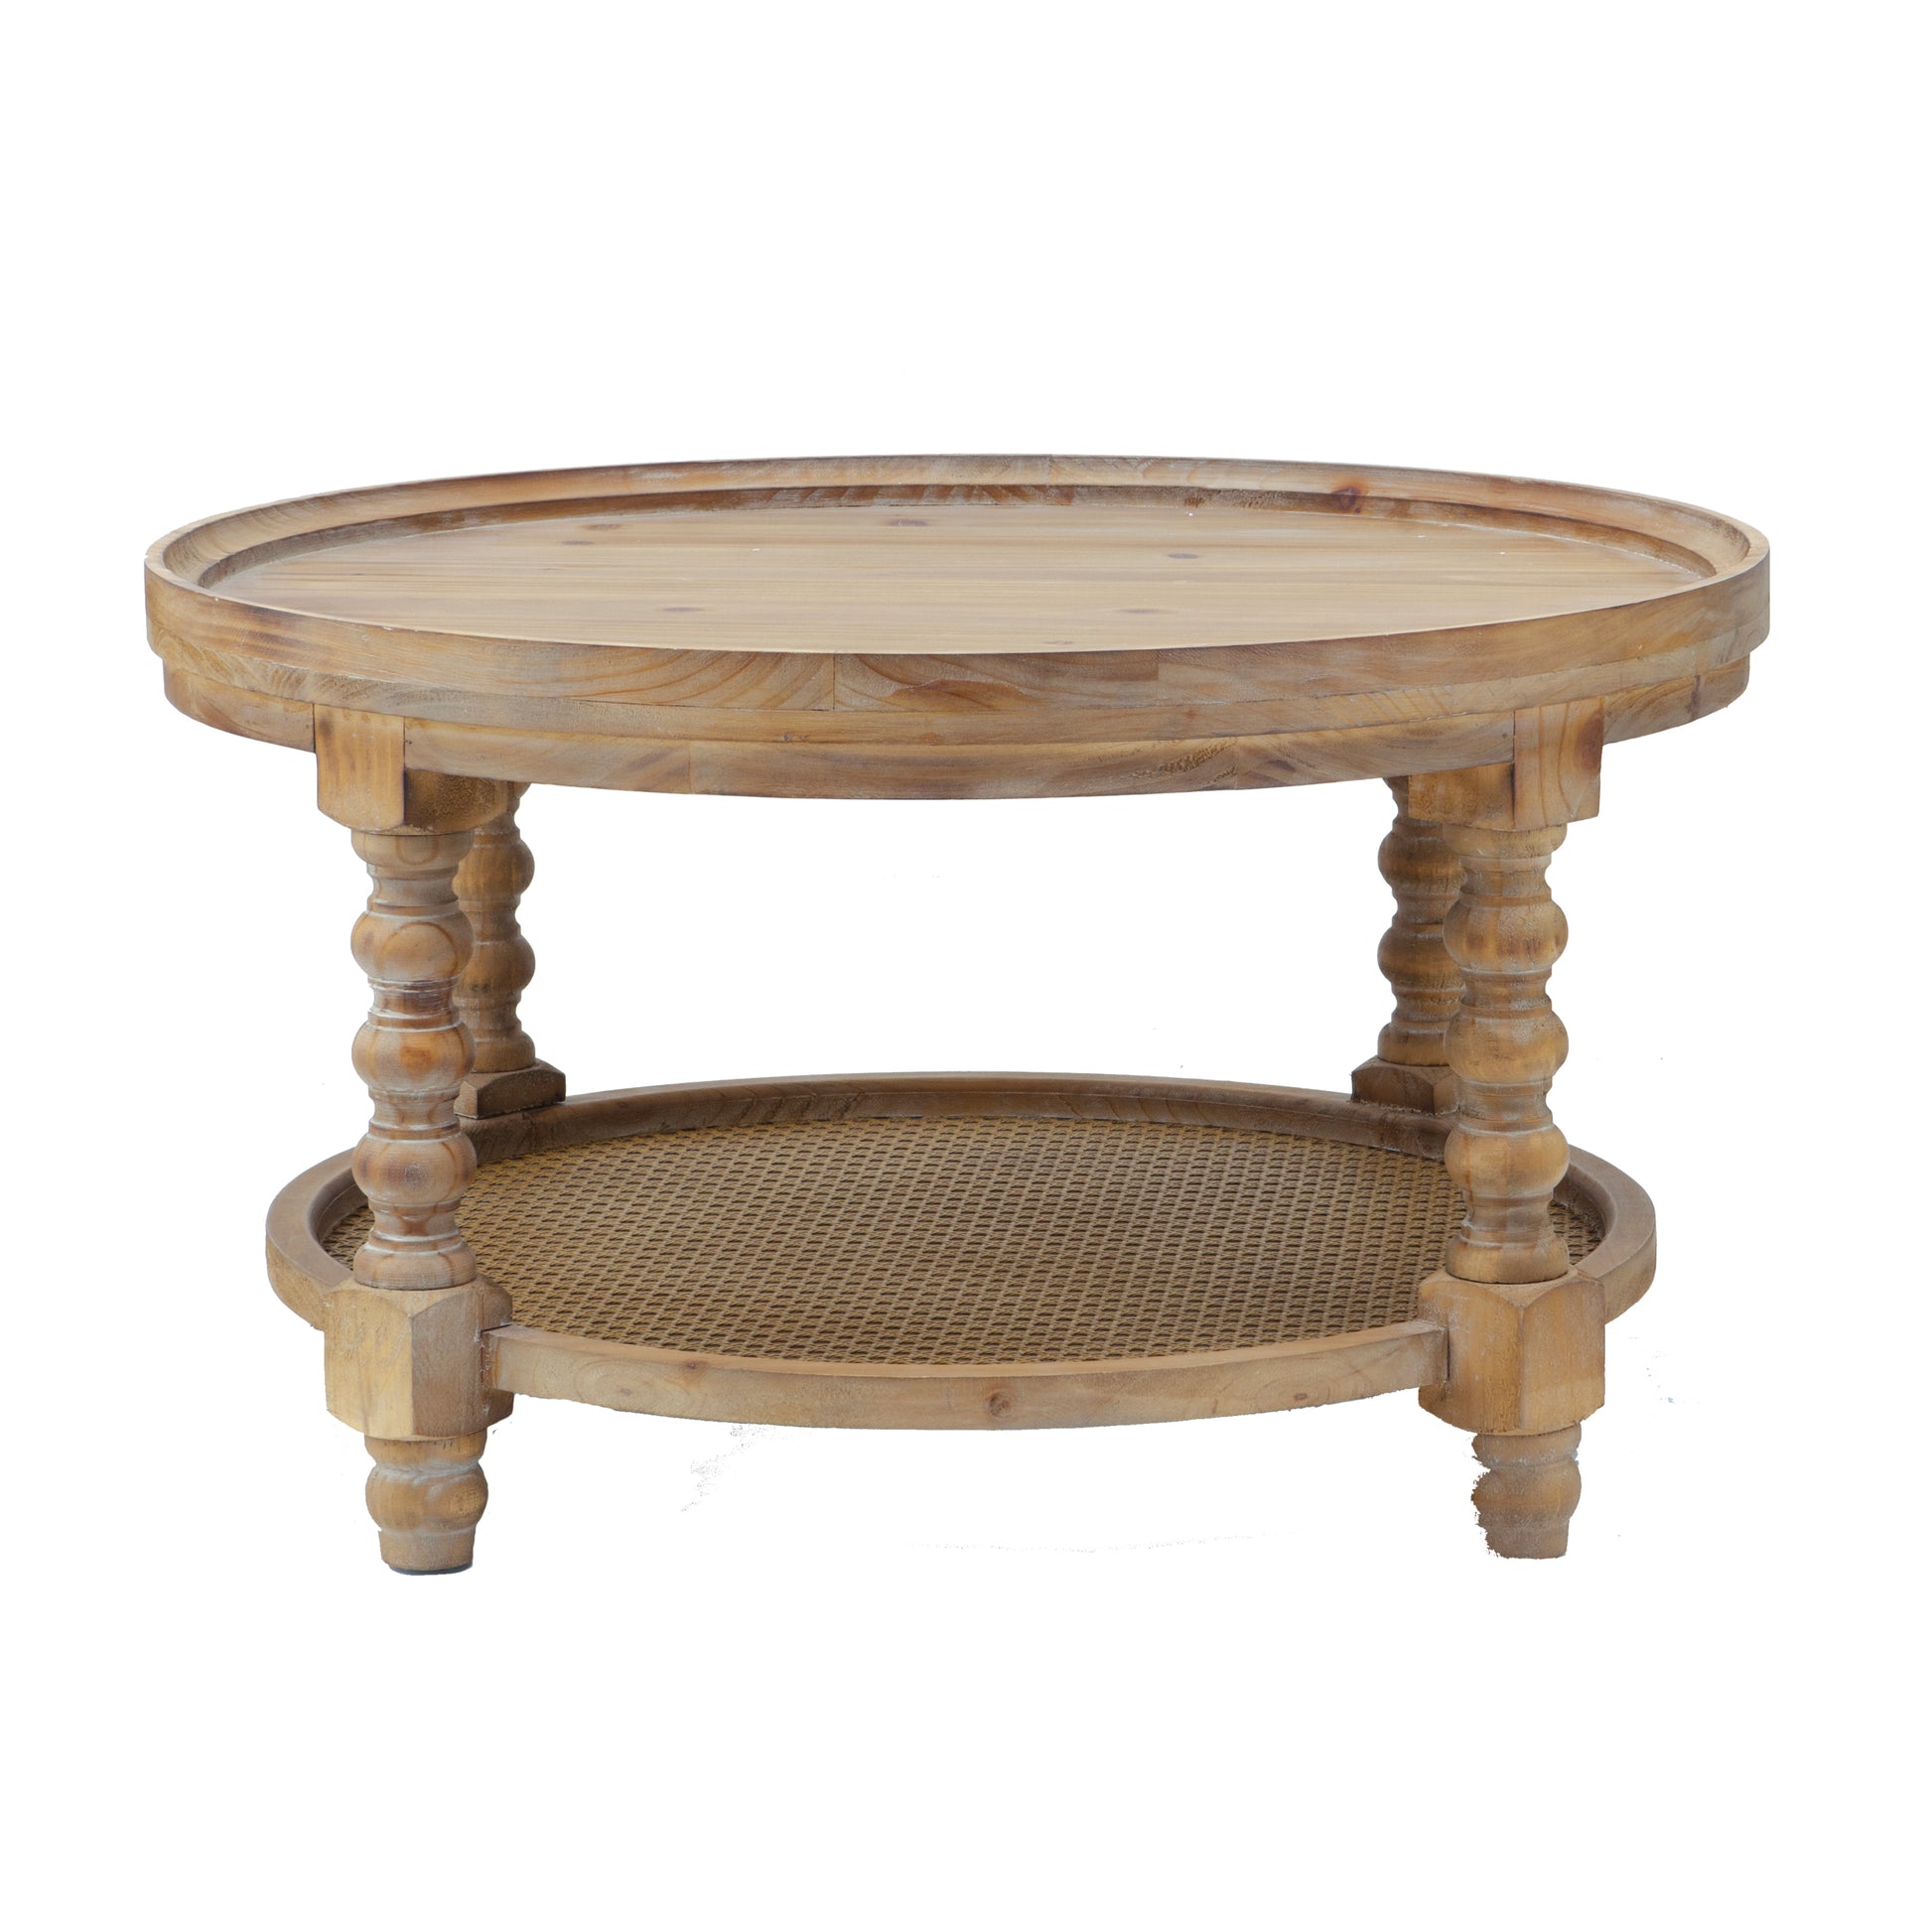 D29.7" x 16.5"Round 2 Tiered Side Tabel, Natural End brown-wood